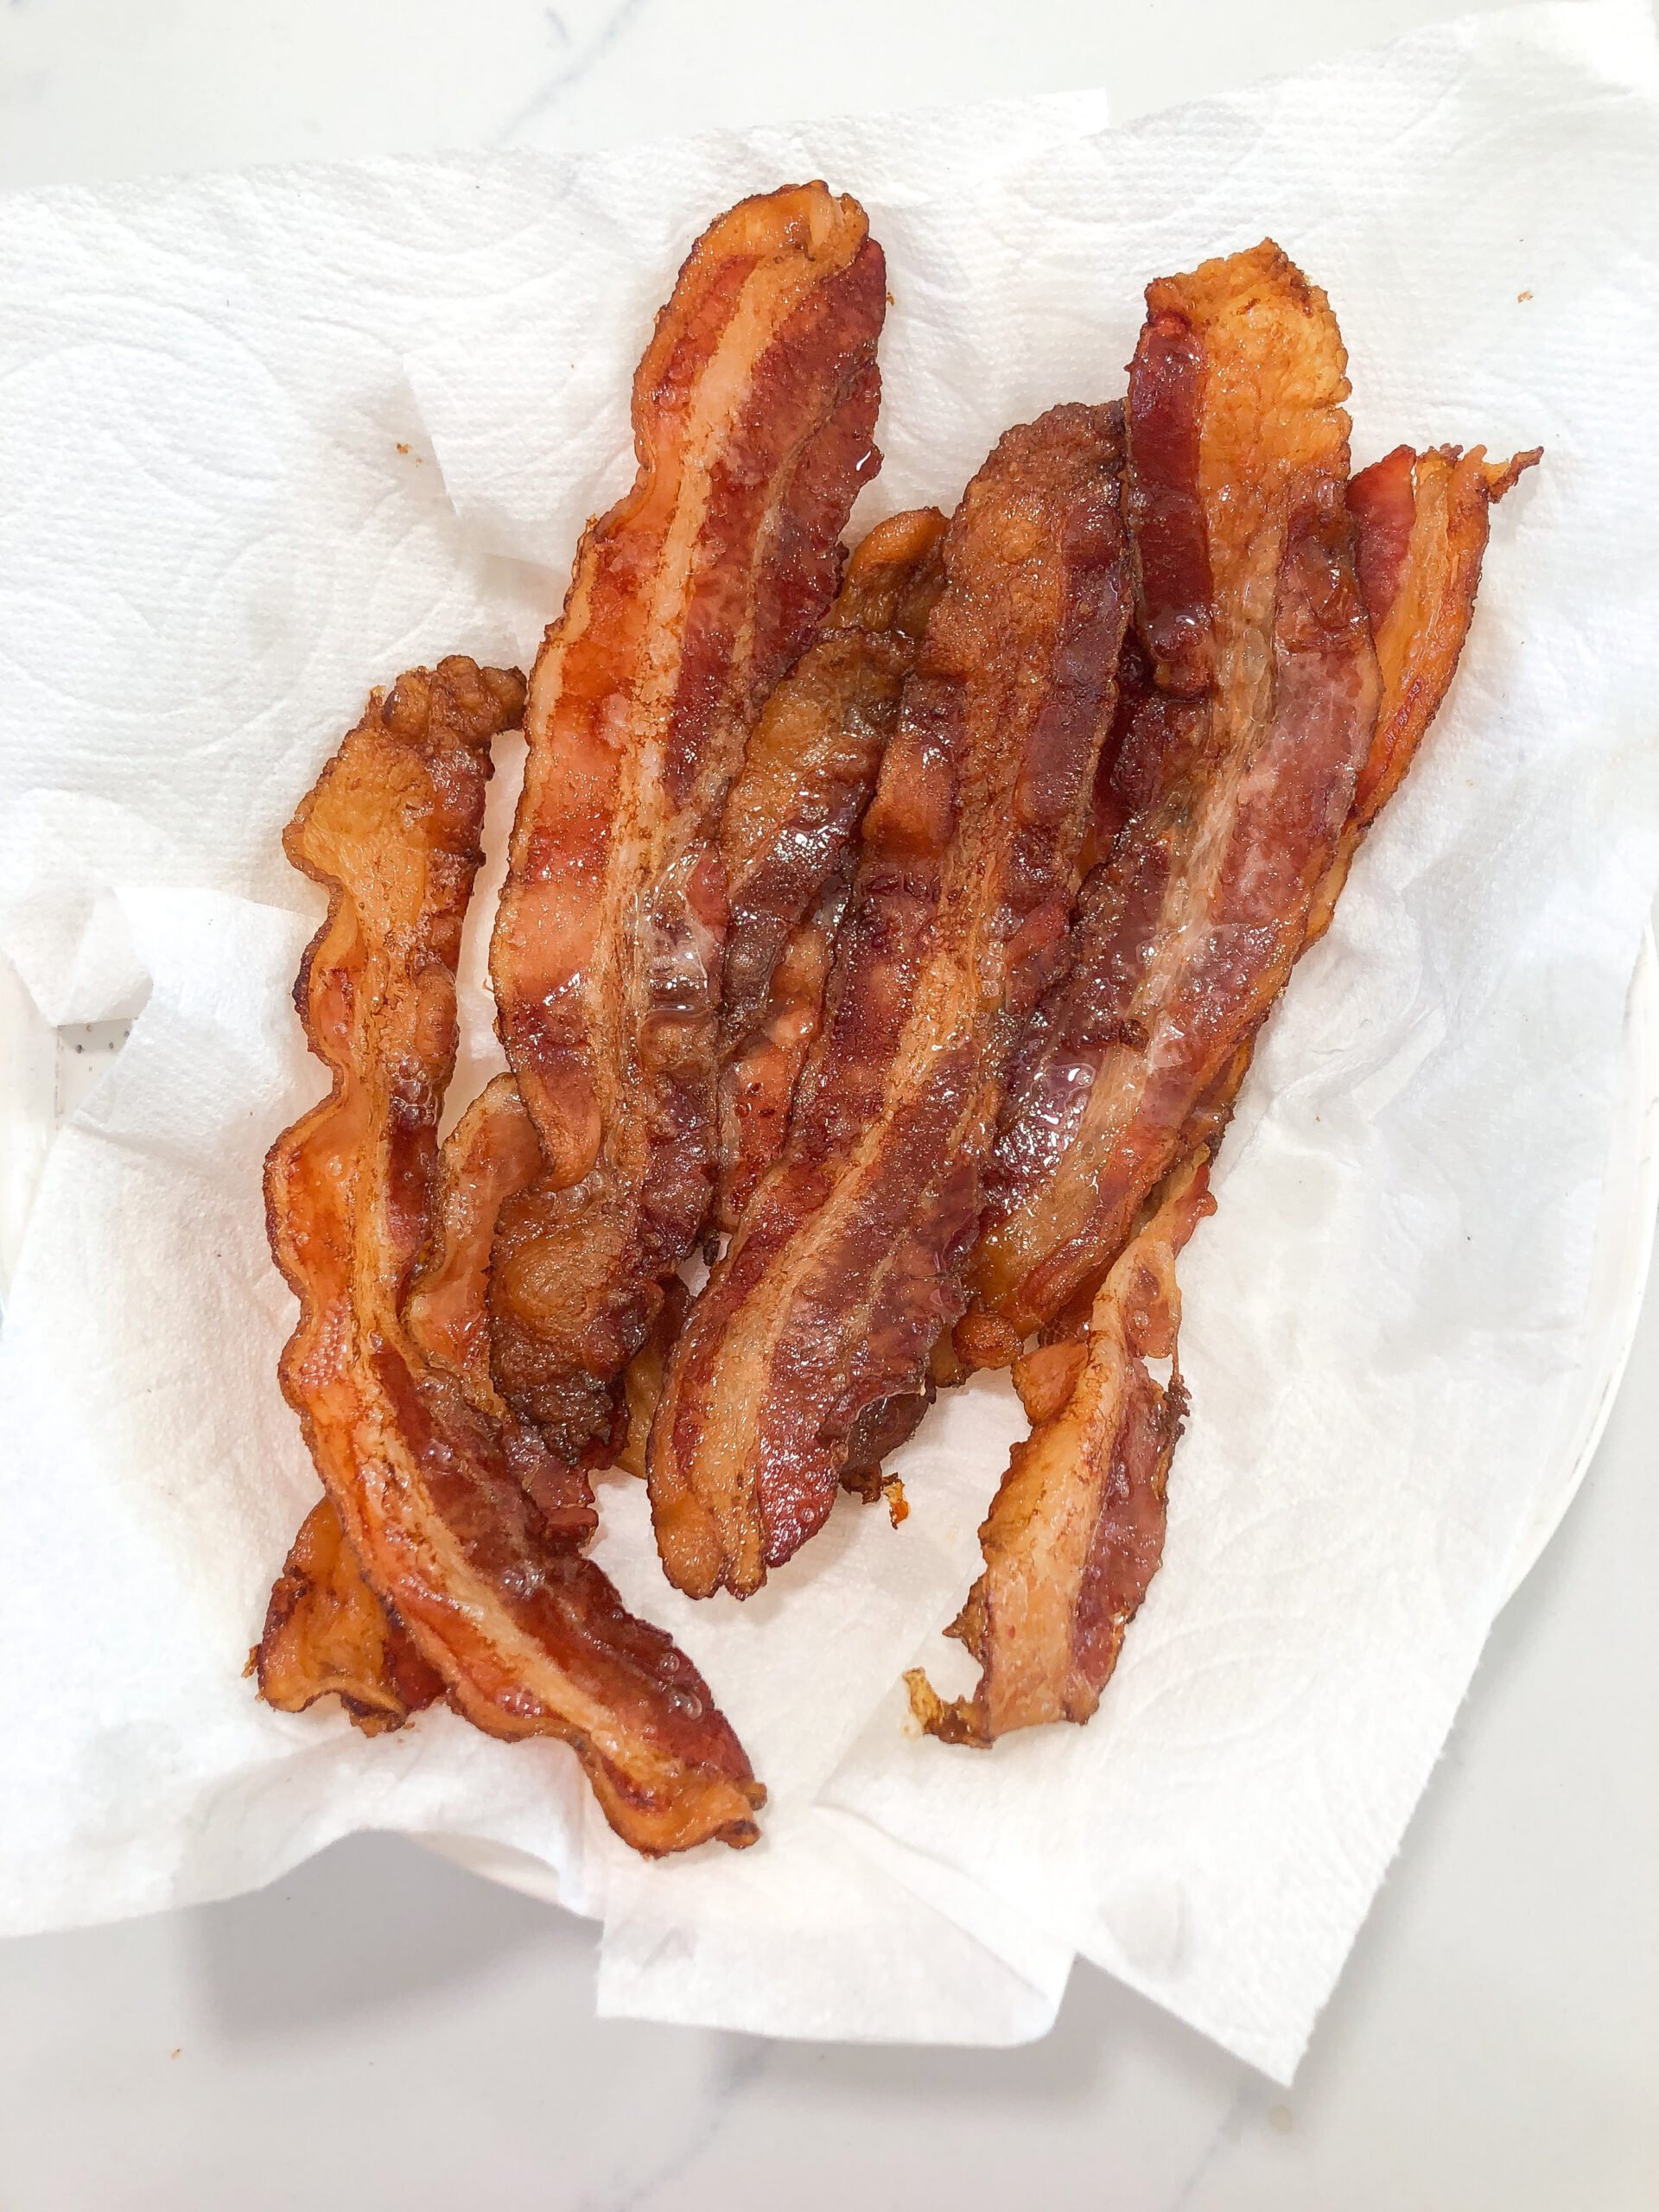 Oven Cooked Bacon: Easy, Hands-Free, Whole30, Keto - Whole Kitchen Sink